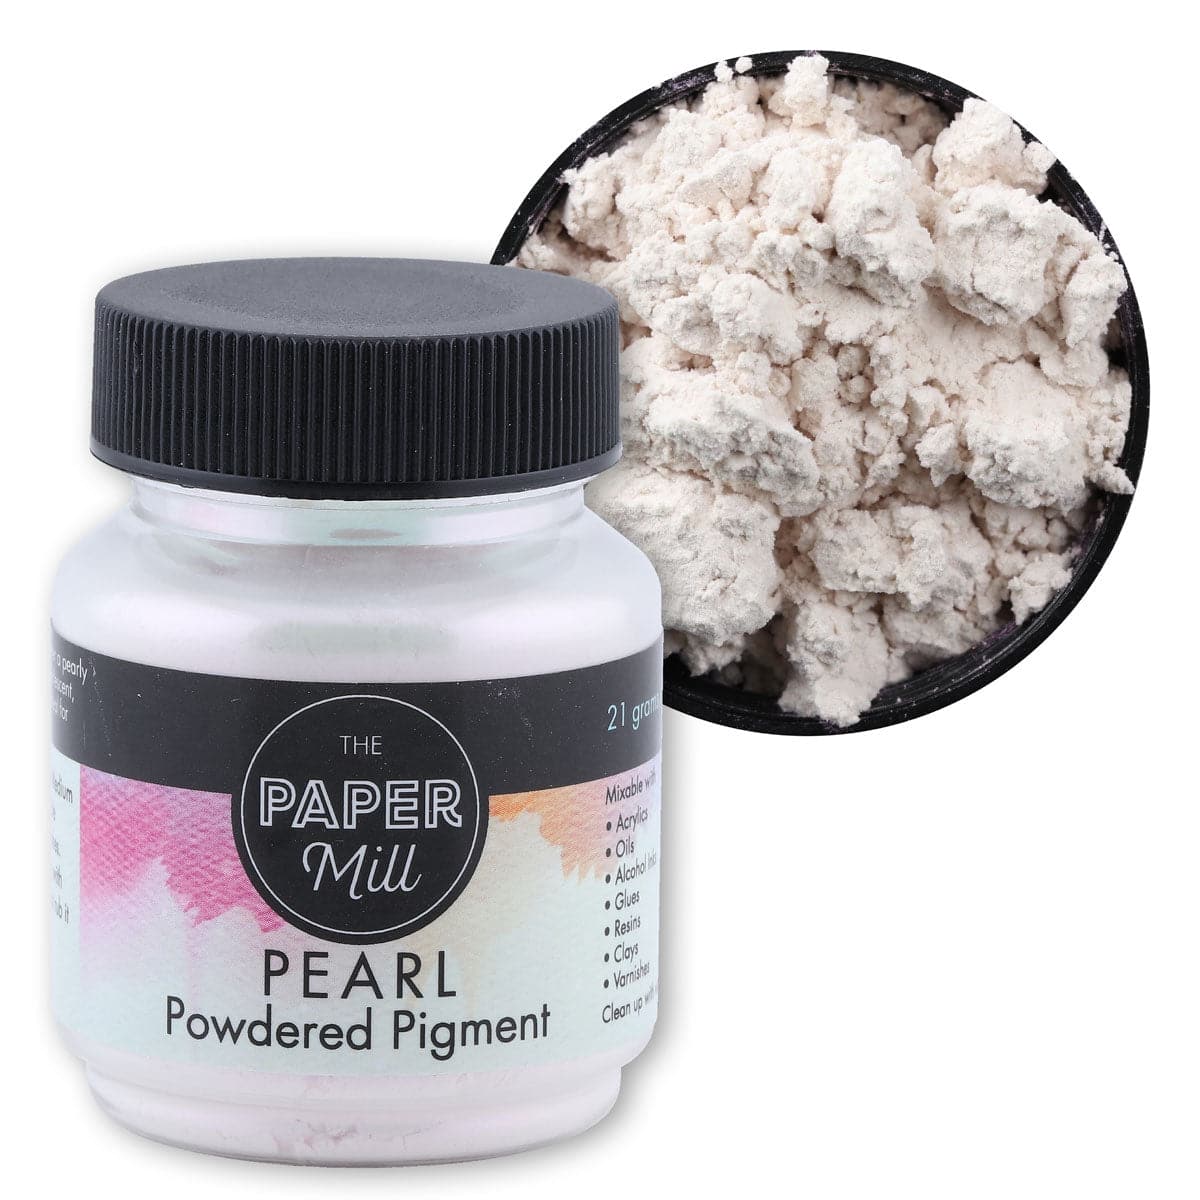 Image of The Paper Mill Pearl Powder Pigment 21g - Iridescent White